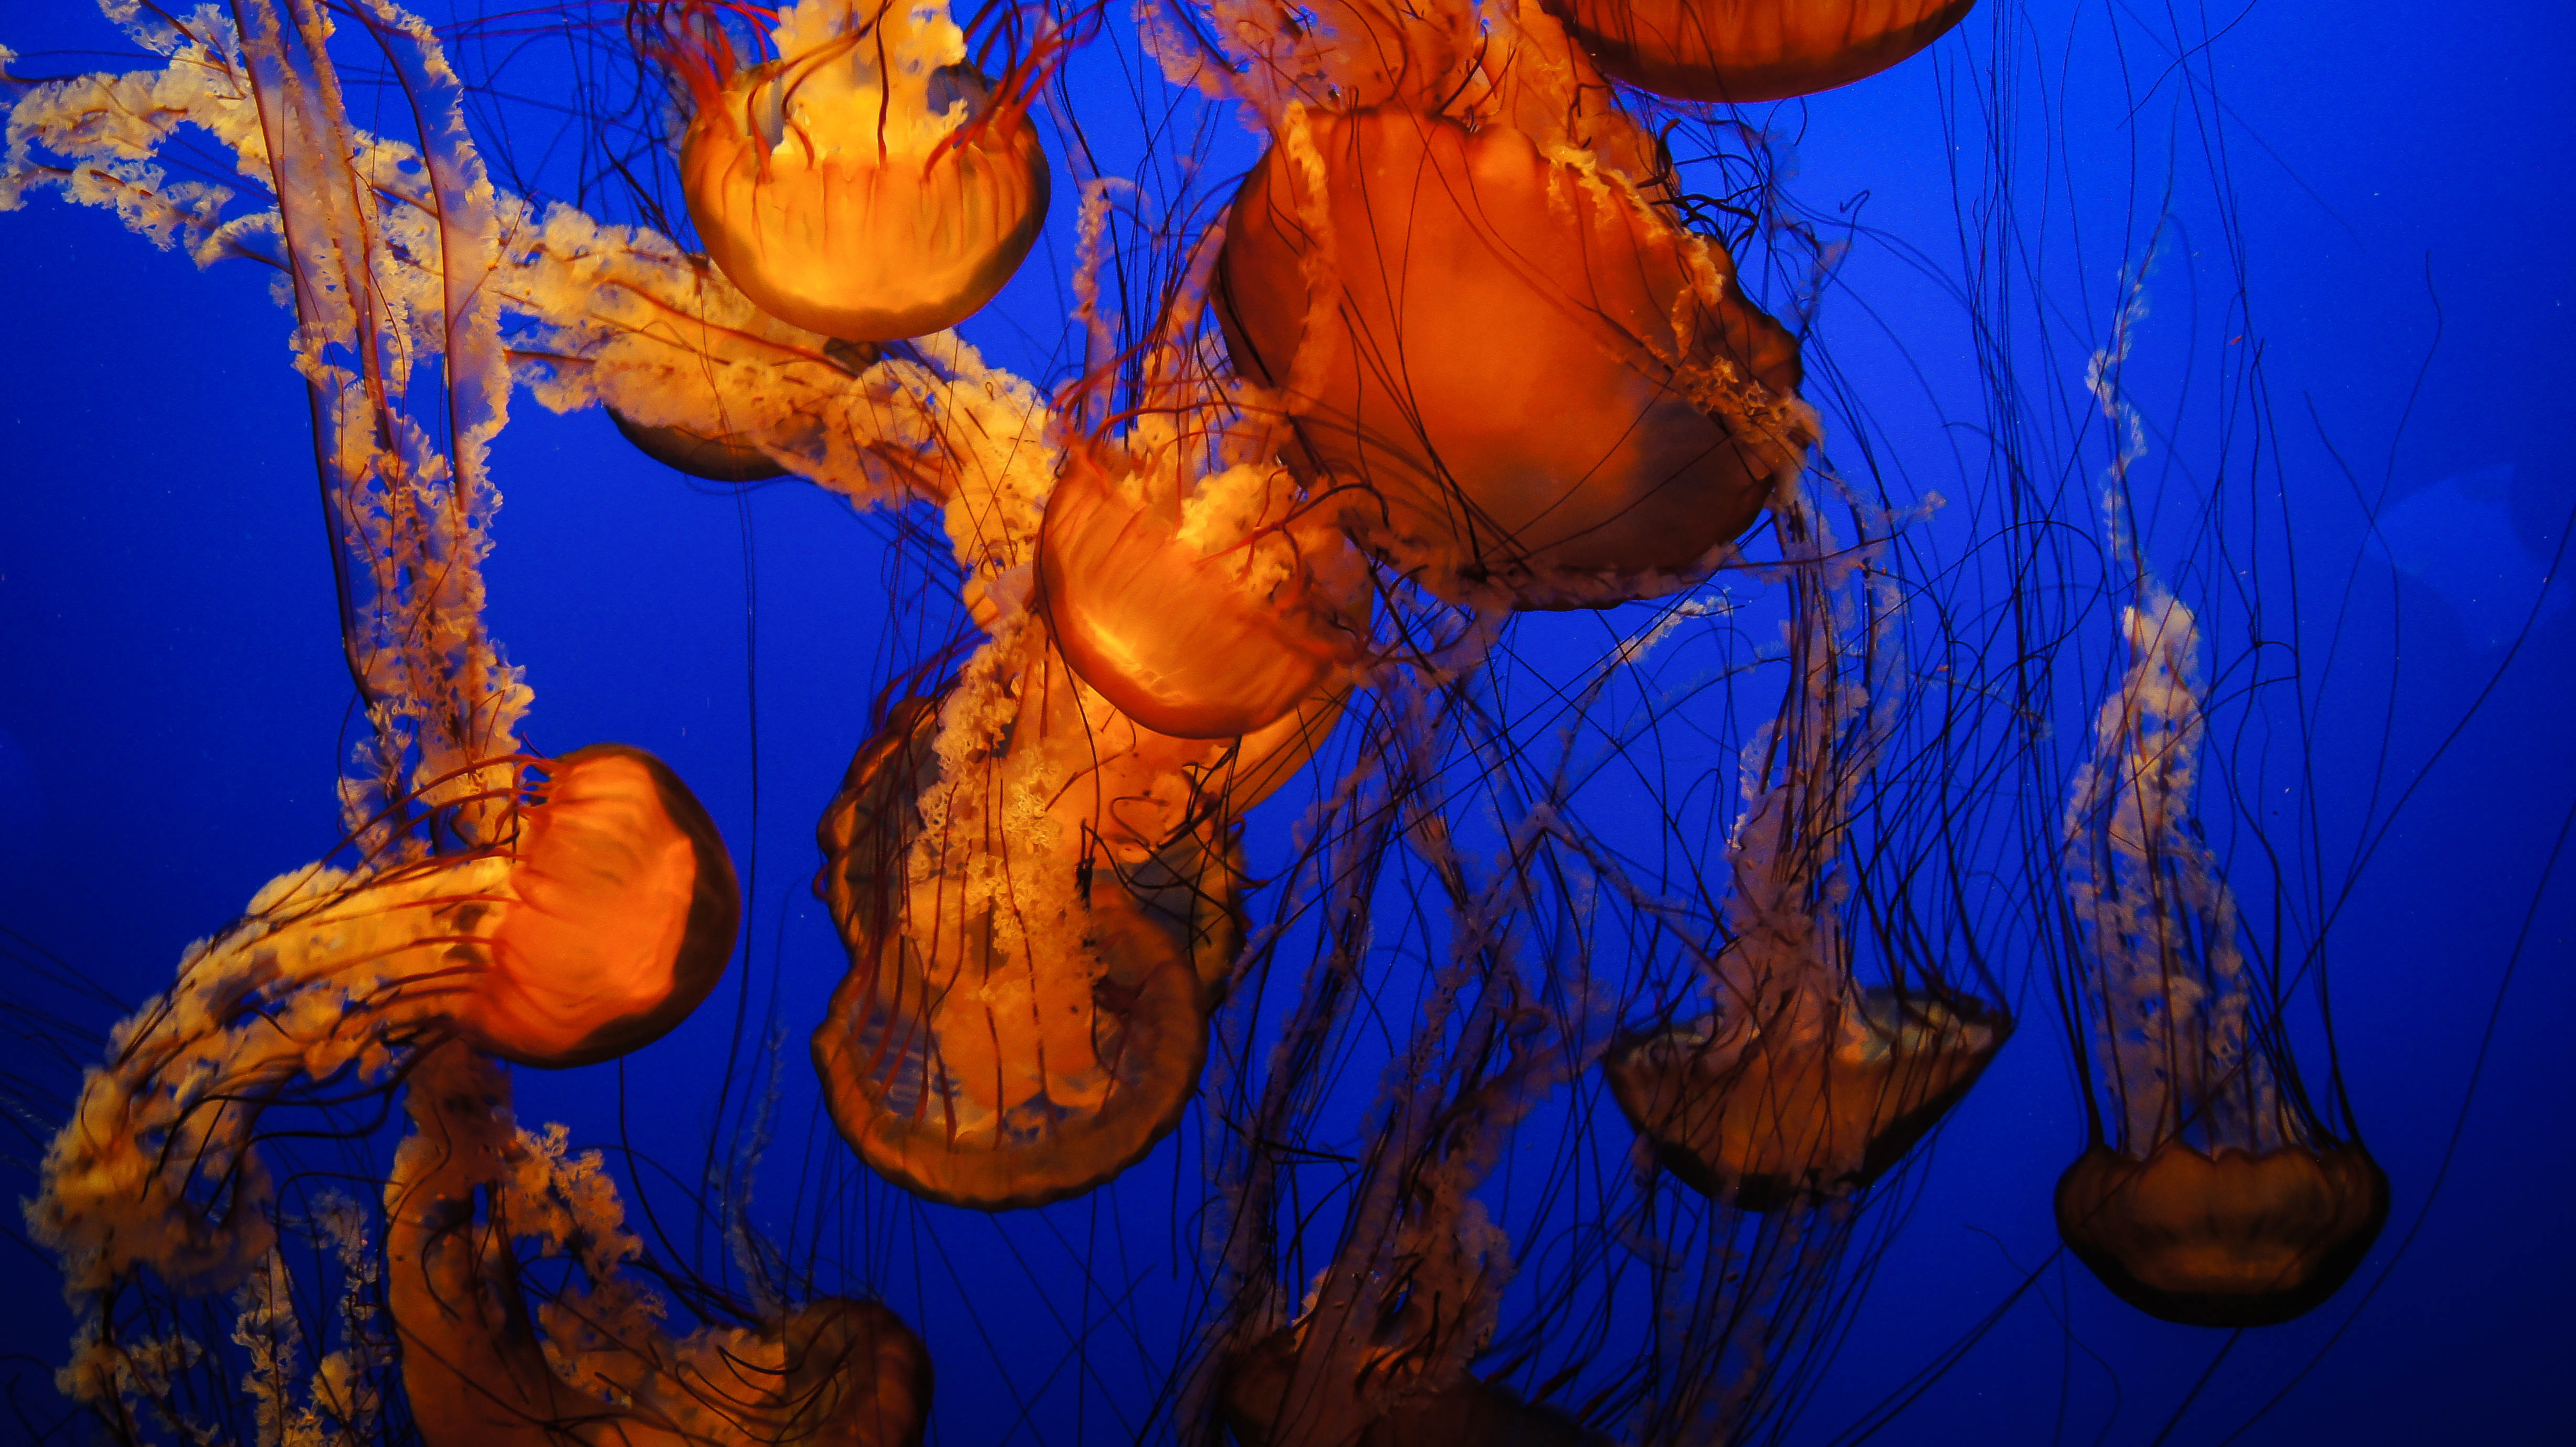 Sea nettle Jellies swimming at the Monterey Bay Aquarium, showing travel stories that connect travelers to different worlds (image © Sam Anaya A.).